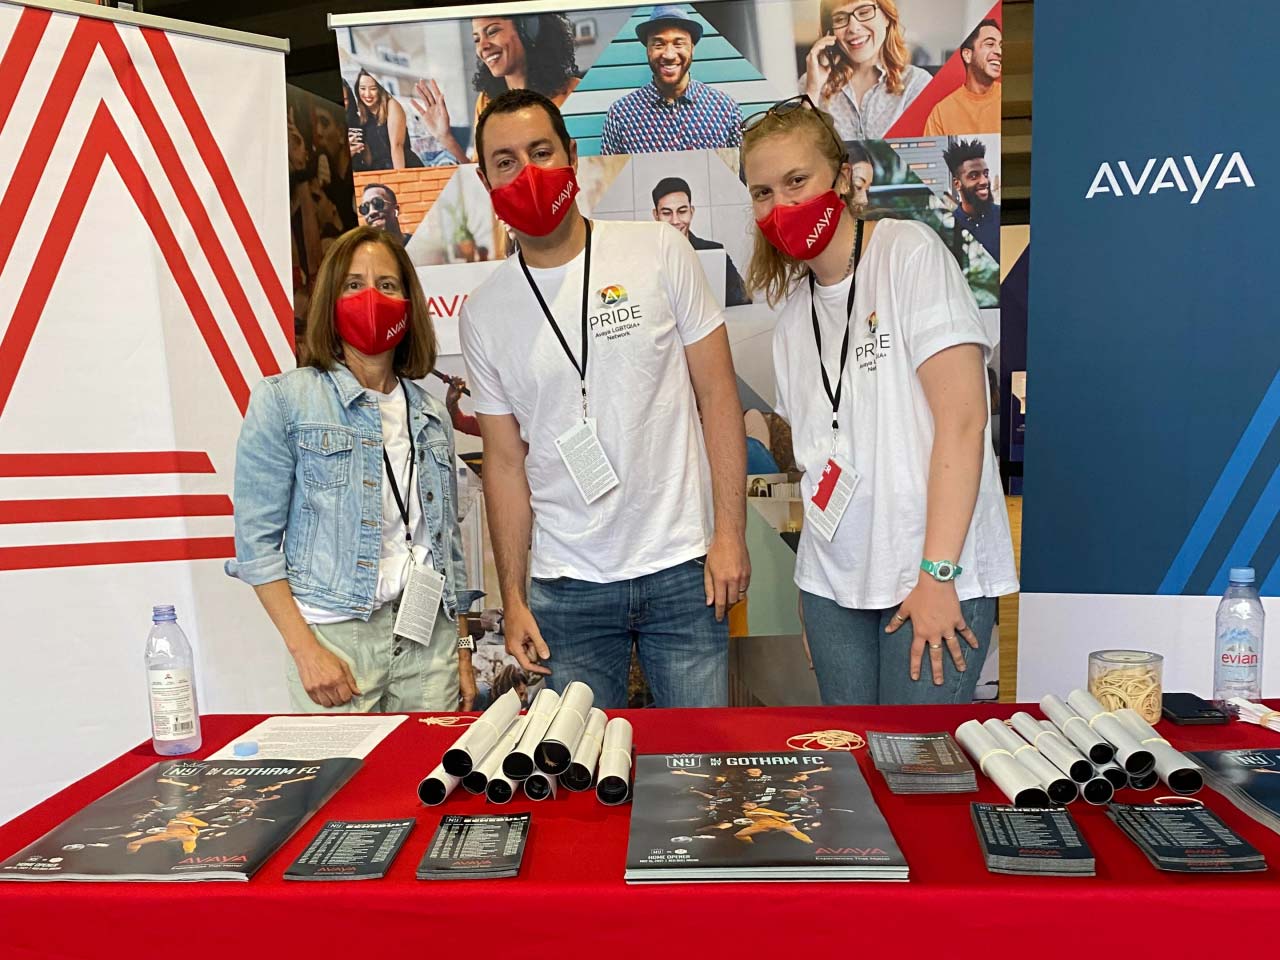 Avaya Employees standing at a booth with Avaya masks on